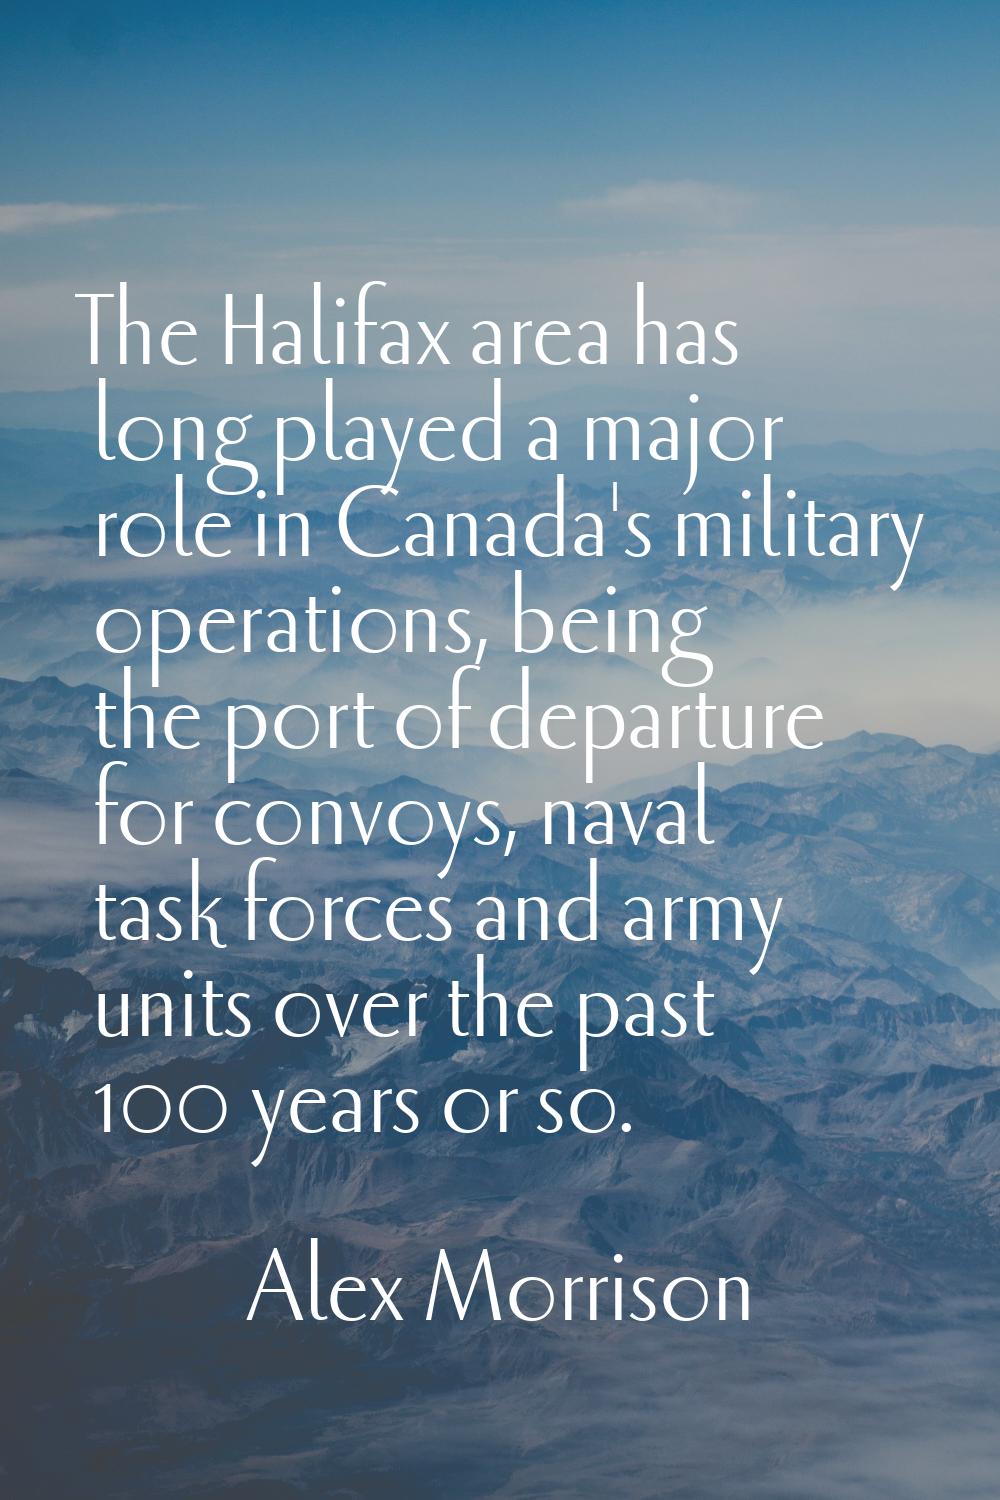 The Halifax area has long played a major role in Canada's military operations, being the port of de